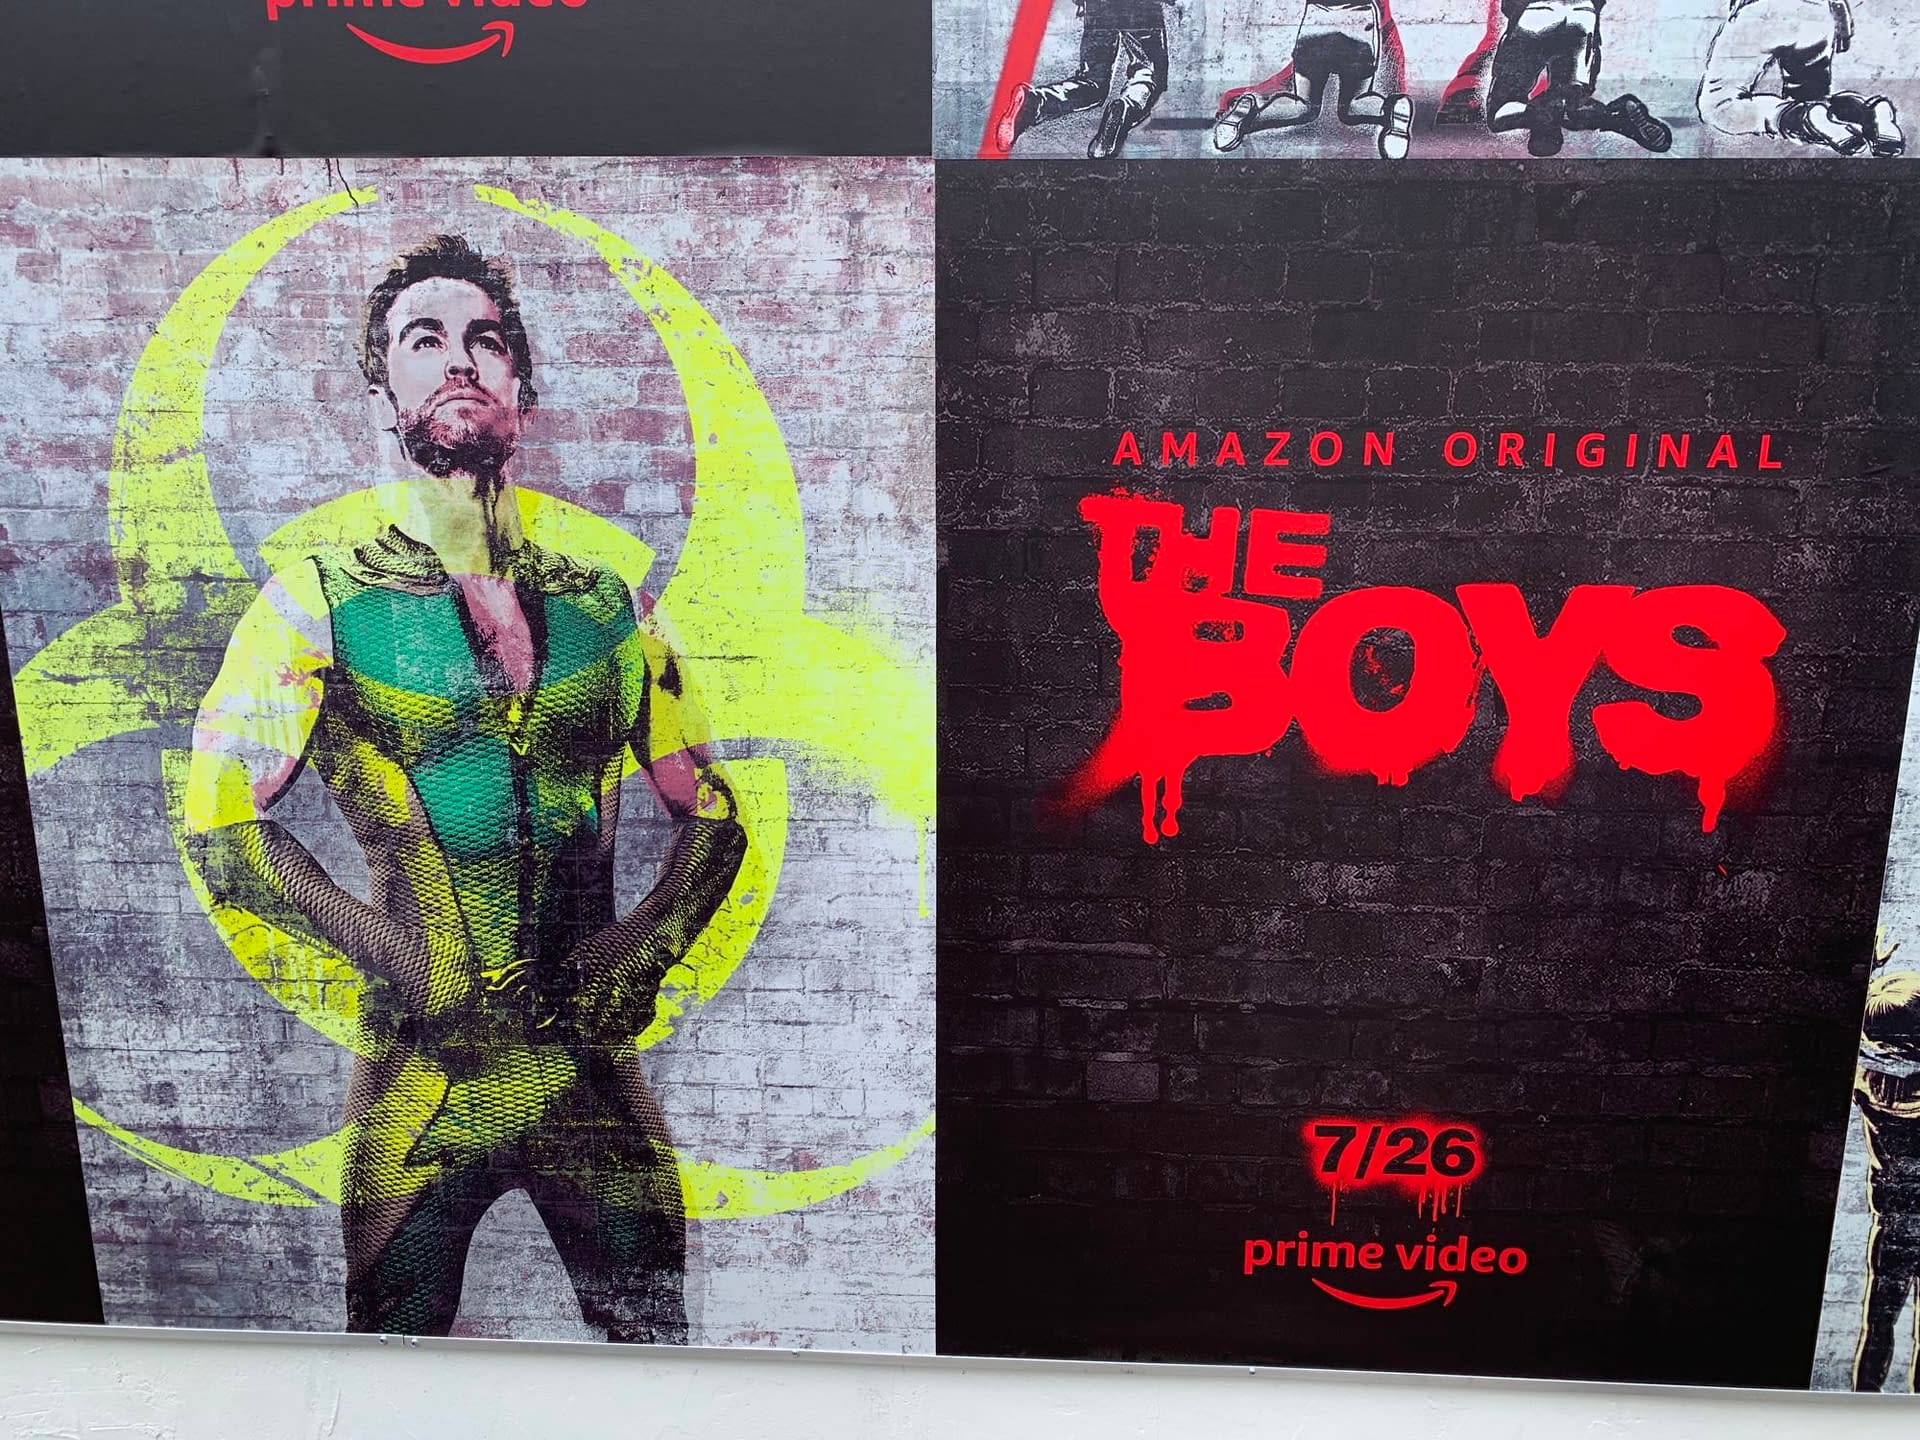 SDCC 2019: Experiencing "The Boys" at the Amazon Prime Video Lot